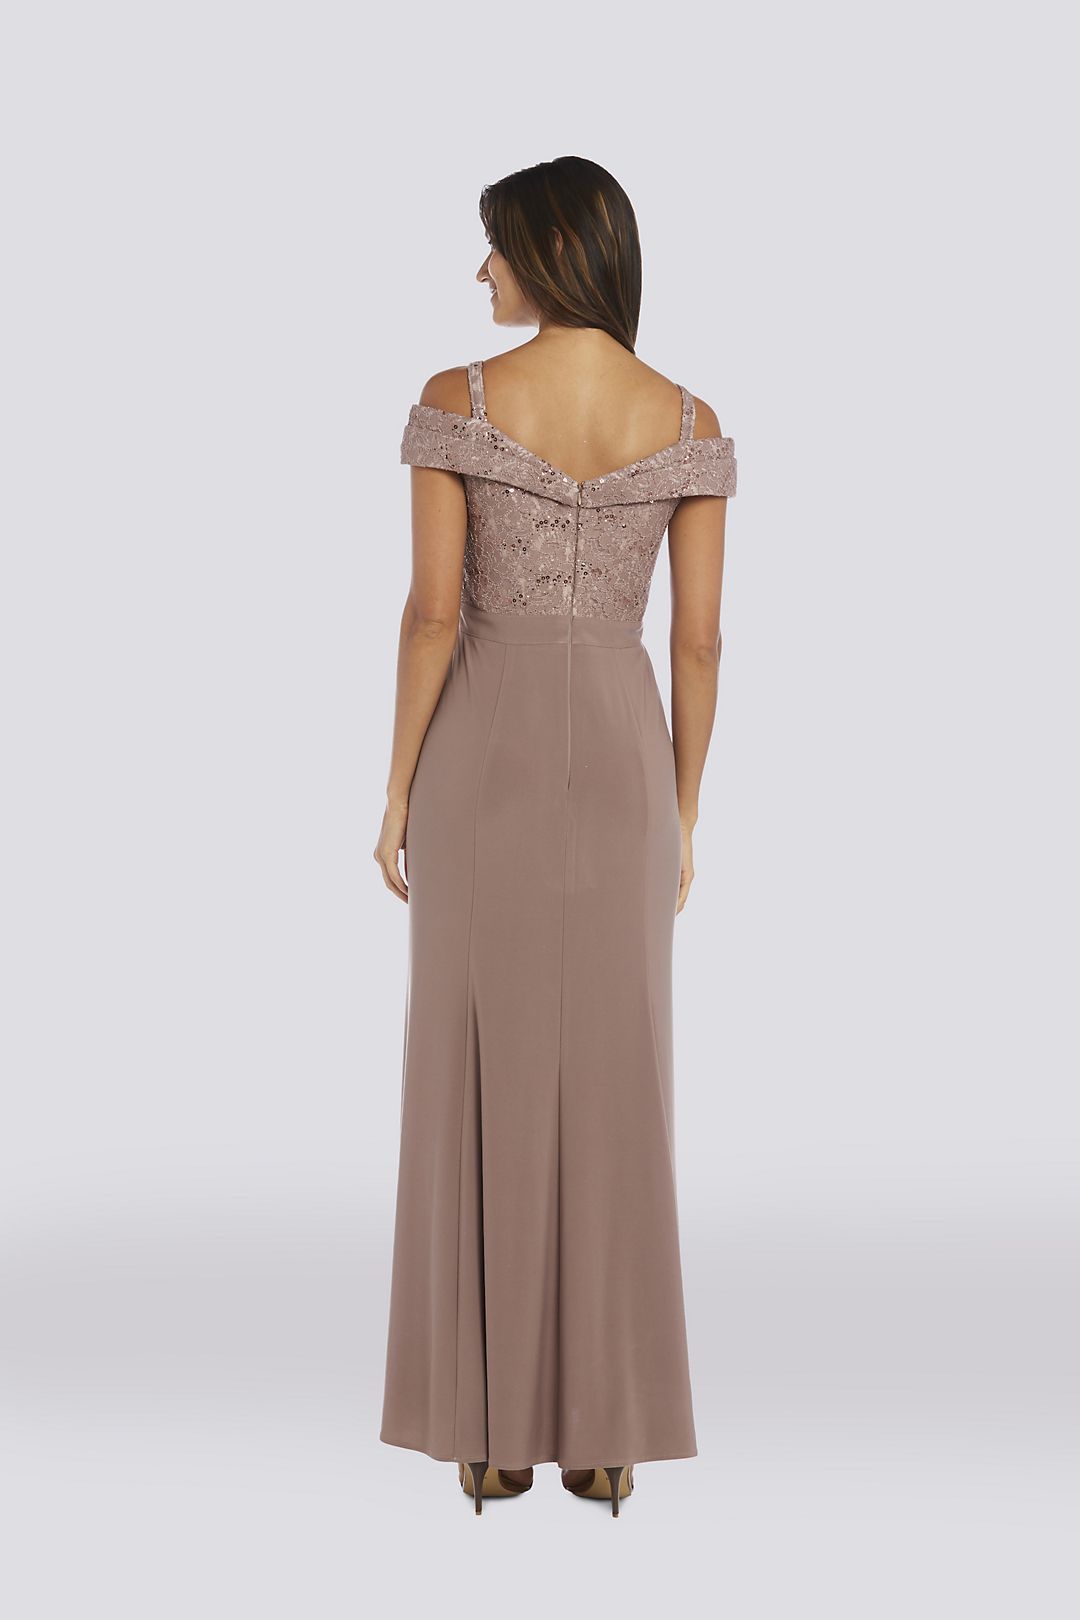 Cold-Shoulder Glitter Lace and Jersey Mermaid Dres Image 3